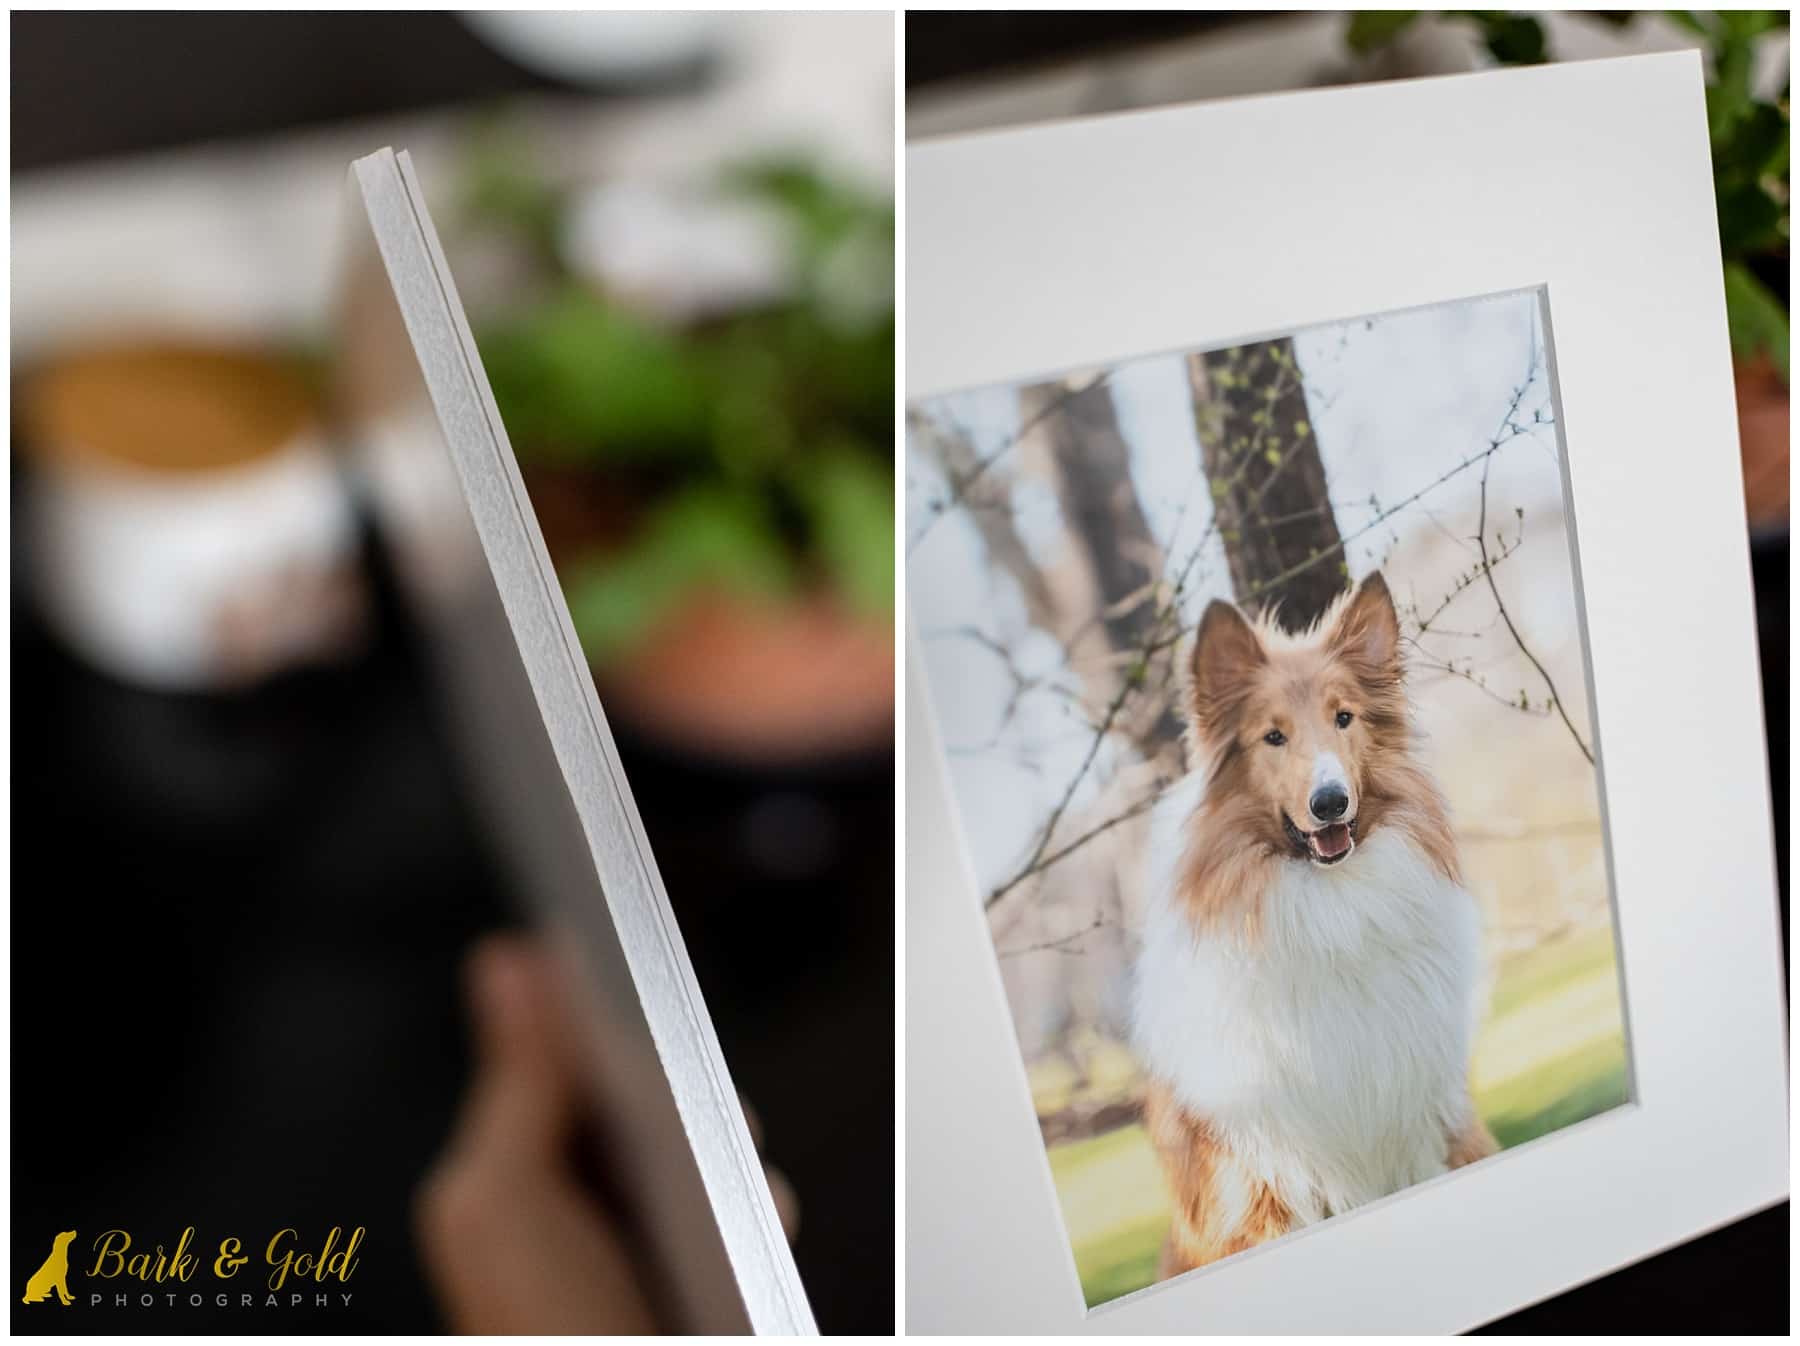 complimentary matted 5x7 gift print of a handsome rough collie